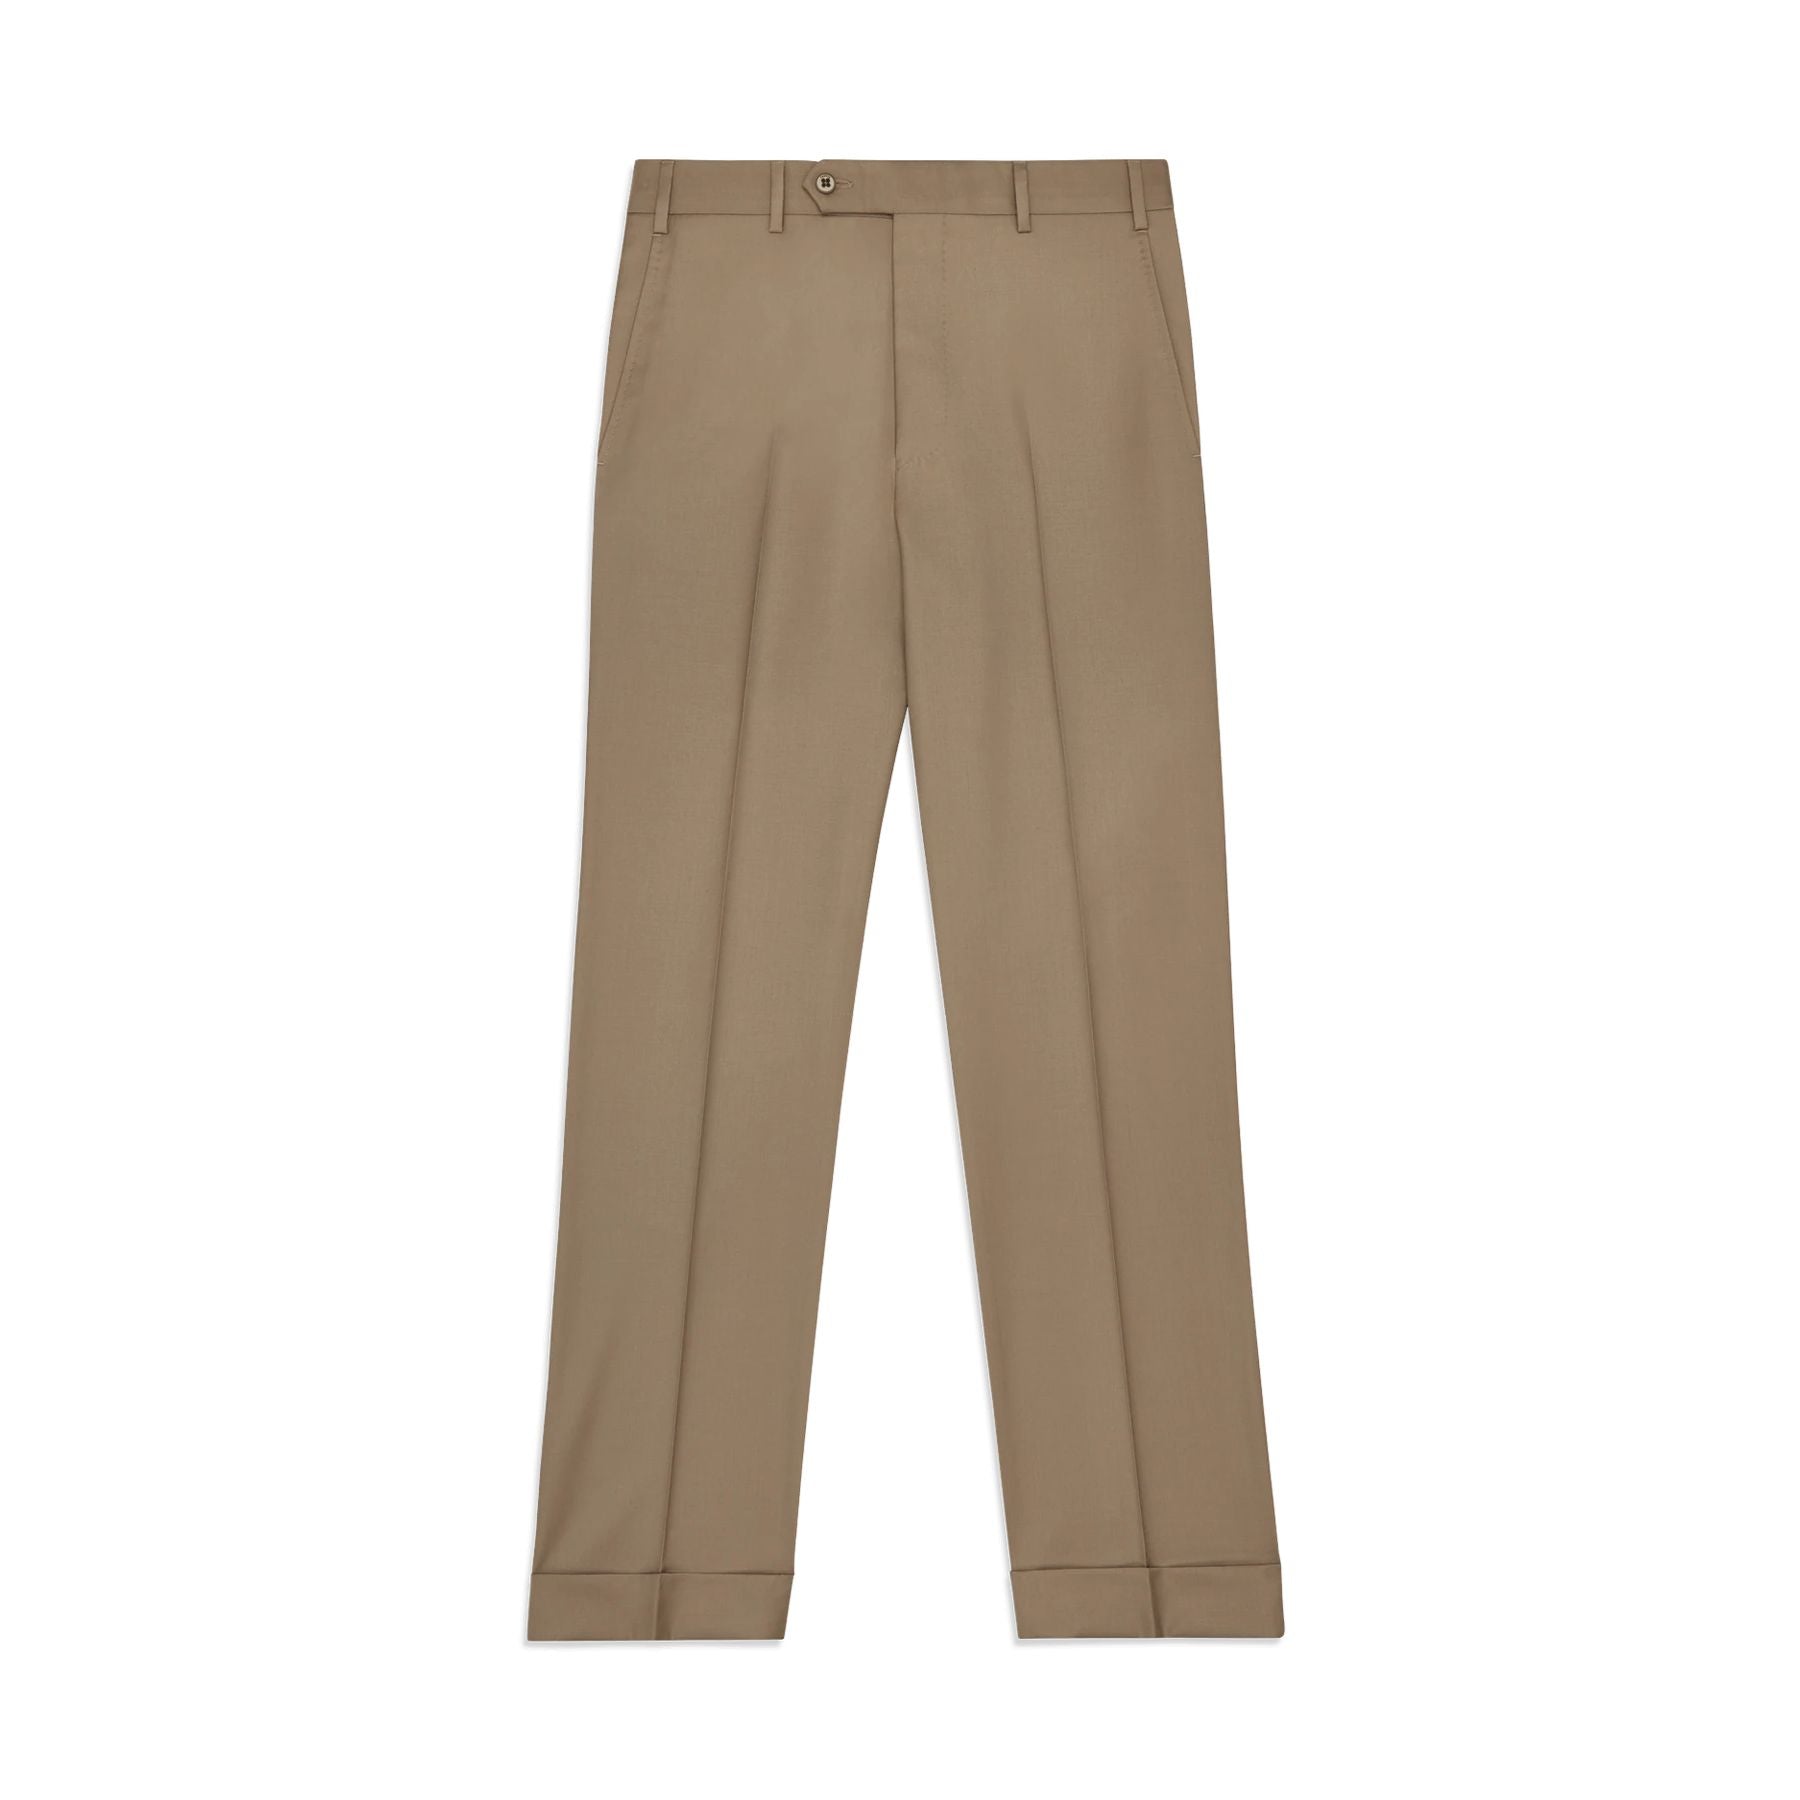 Todd Flat Front Super 120s Wool Serge Trouser in Tan (Size 40) (Full Fit) by Zanella